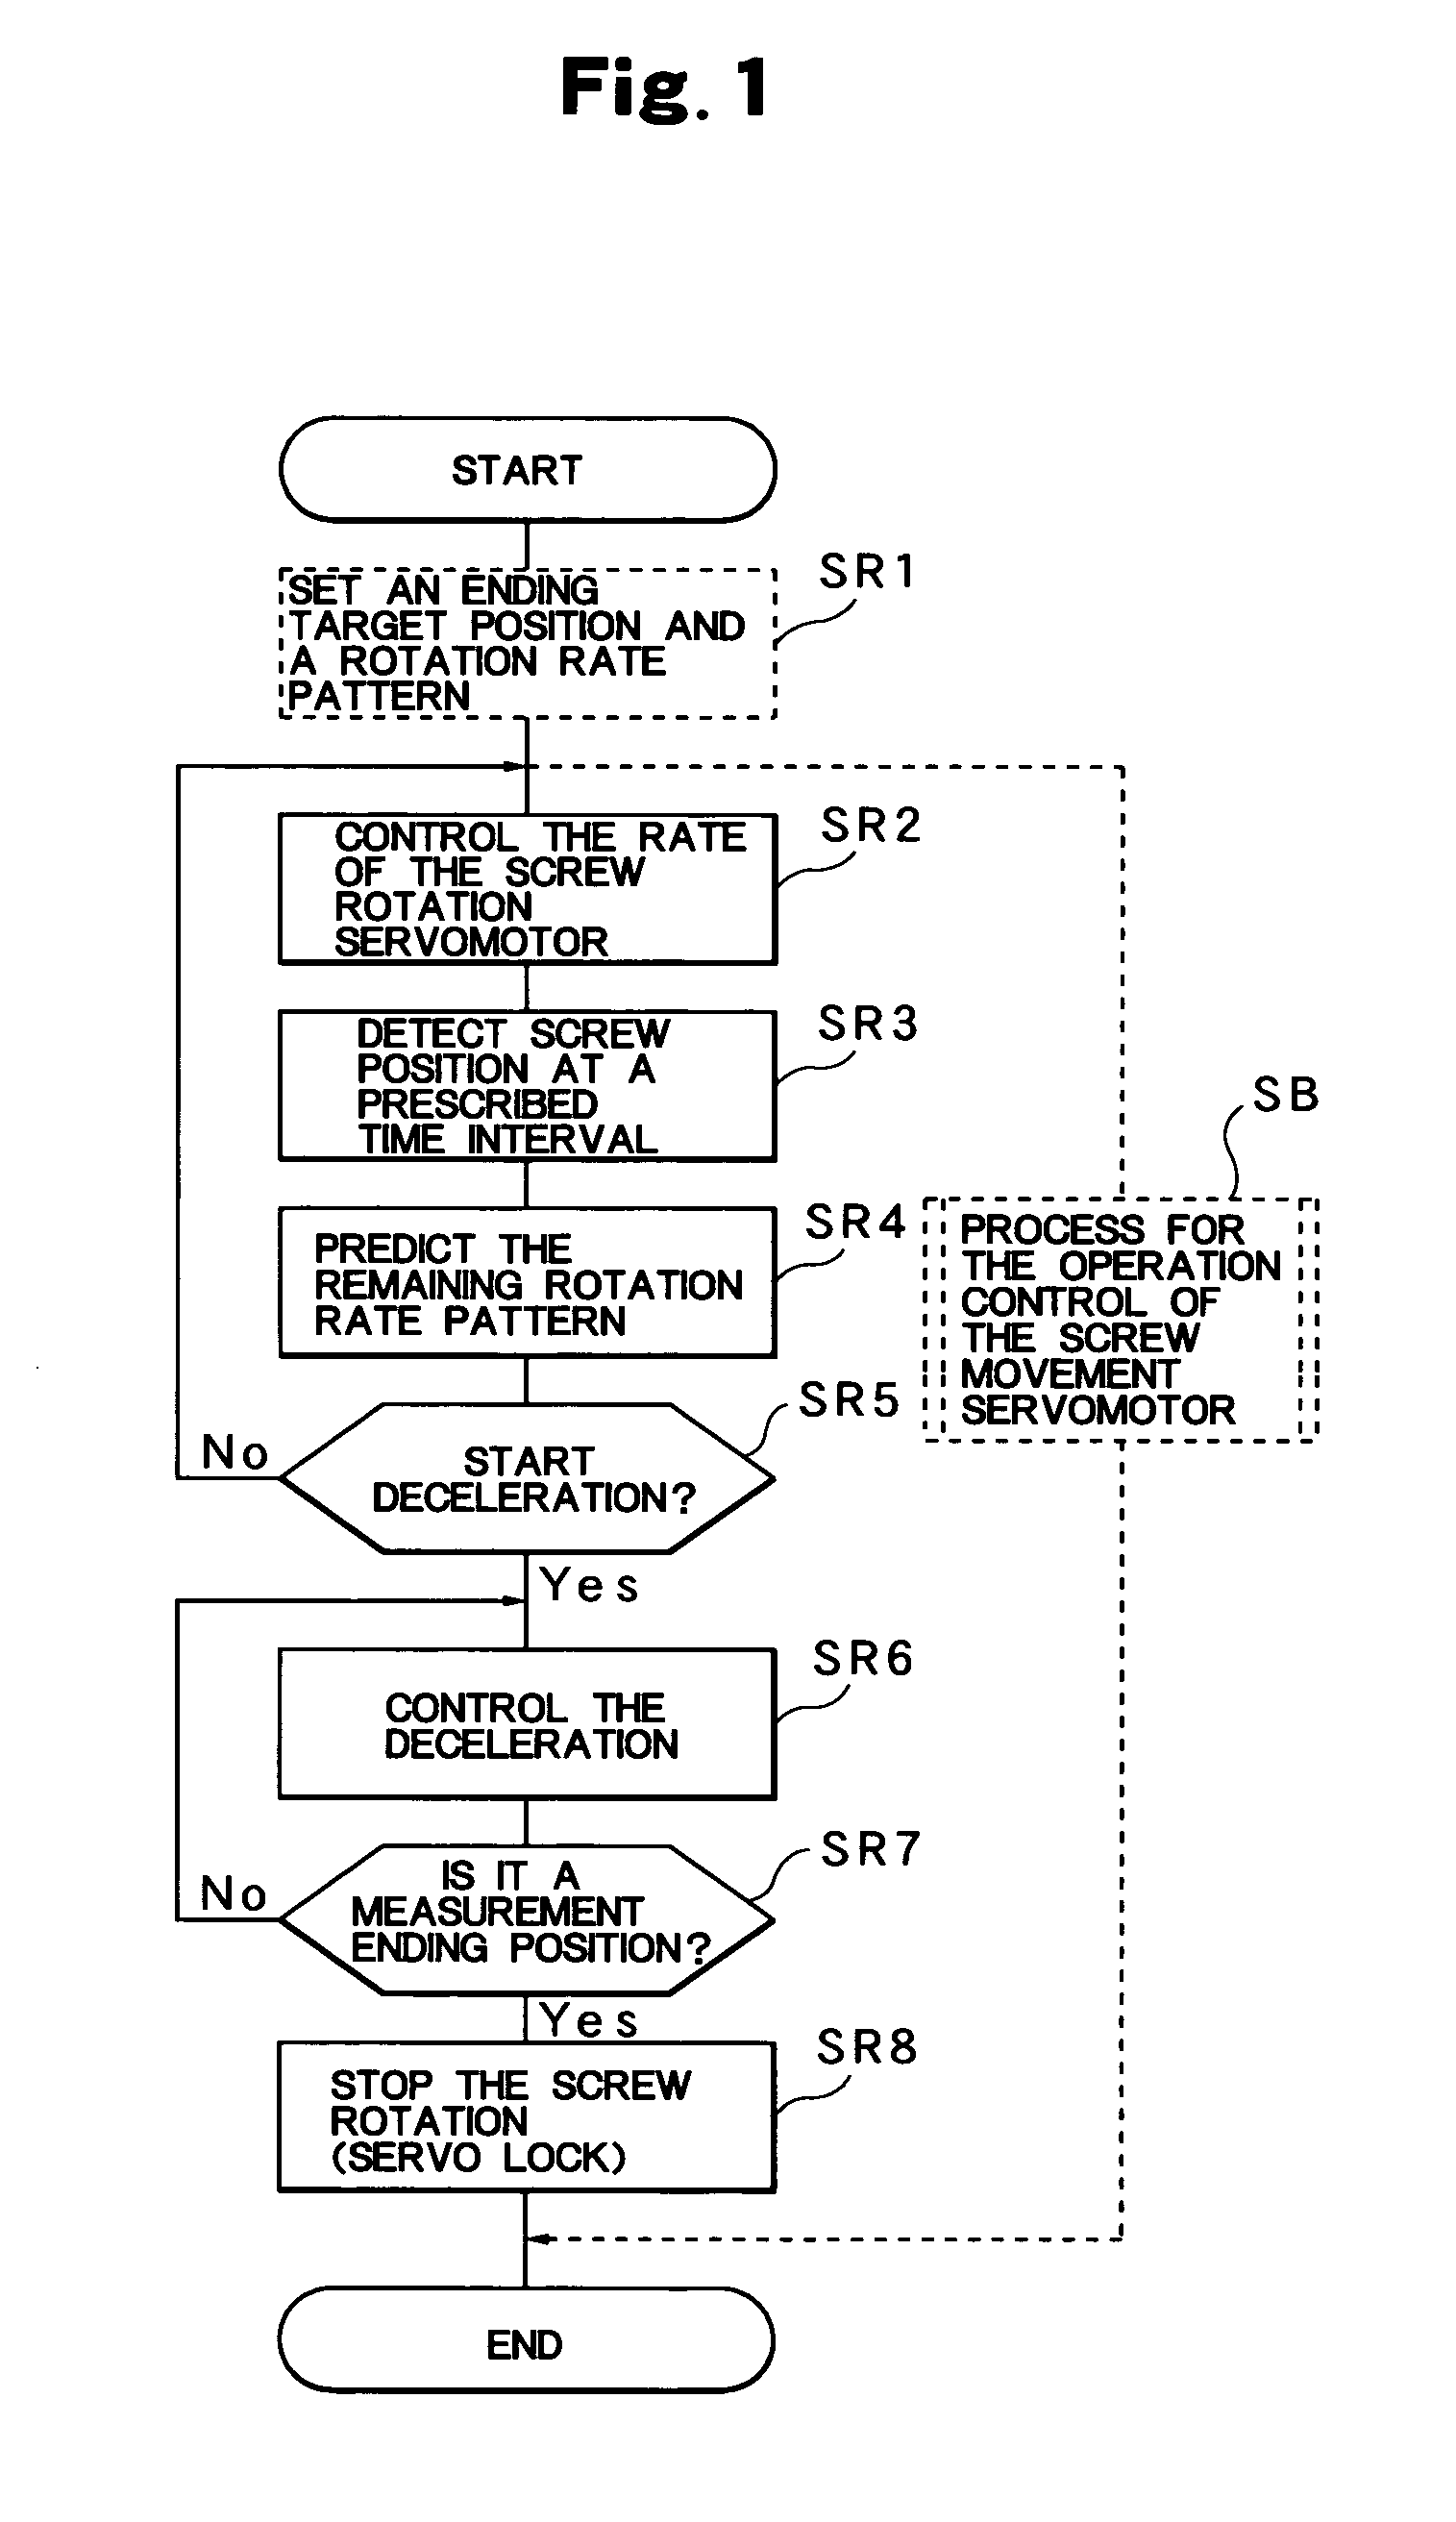 Measurement control method of an injection molding machine